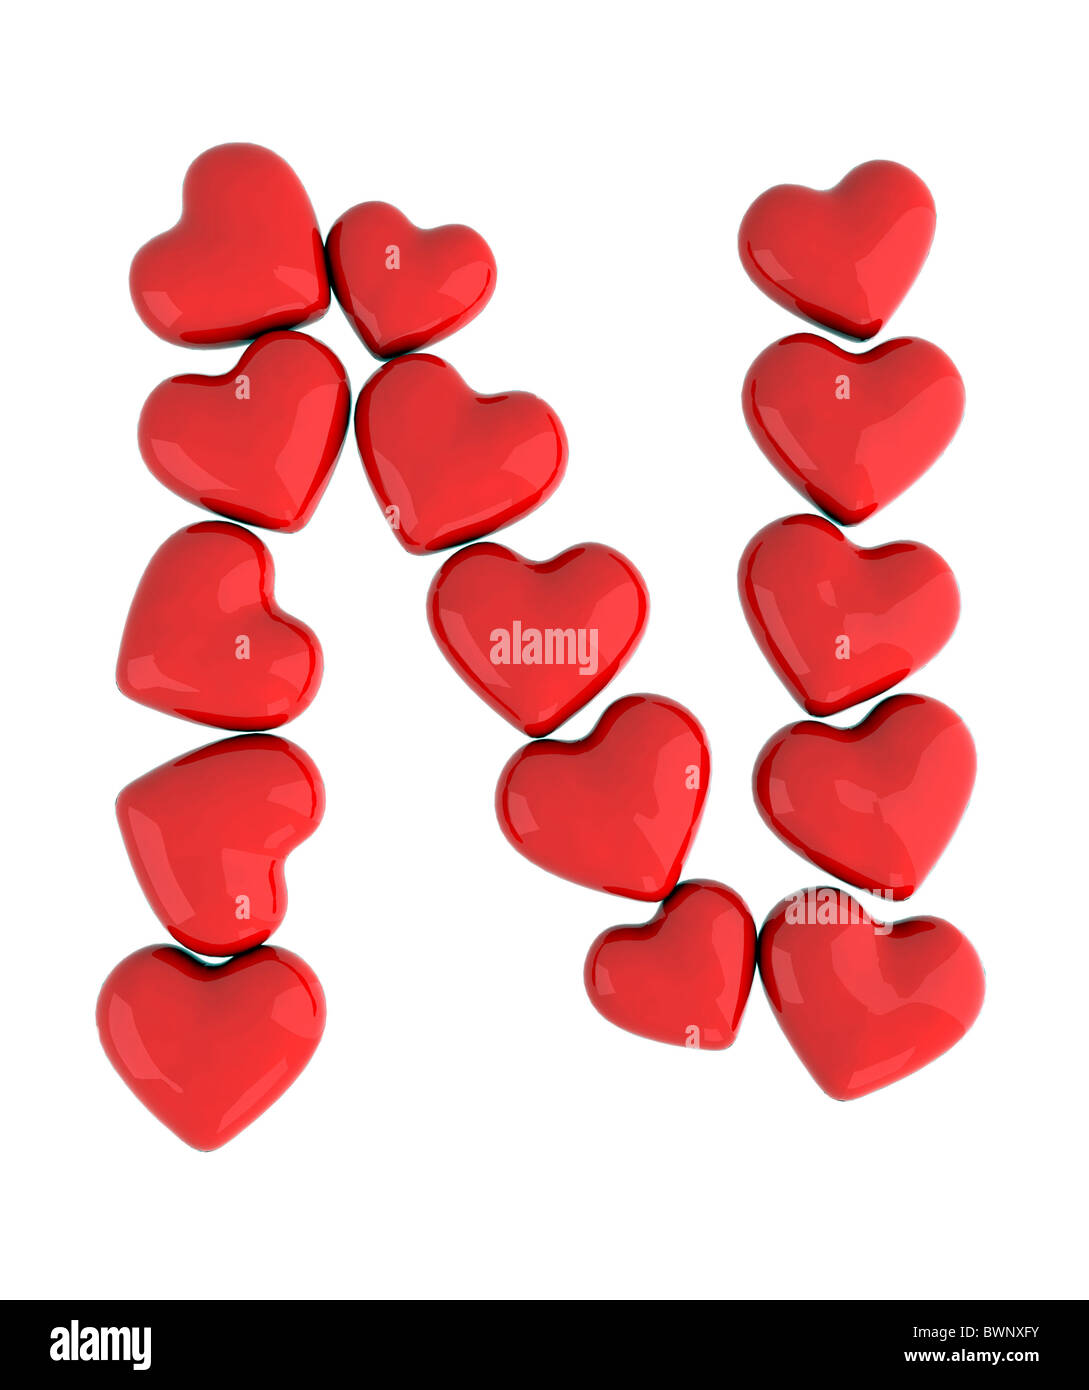 letter n with red hearts Stock Photo